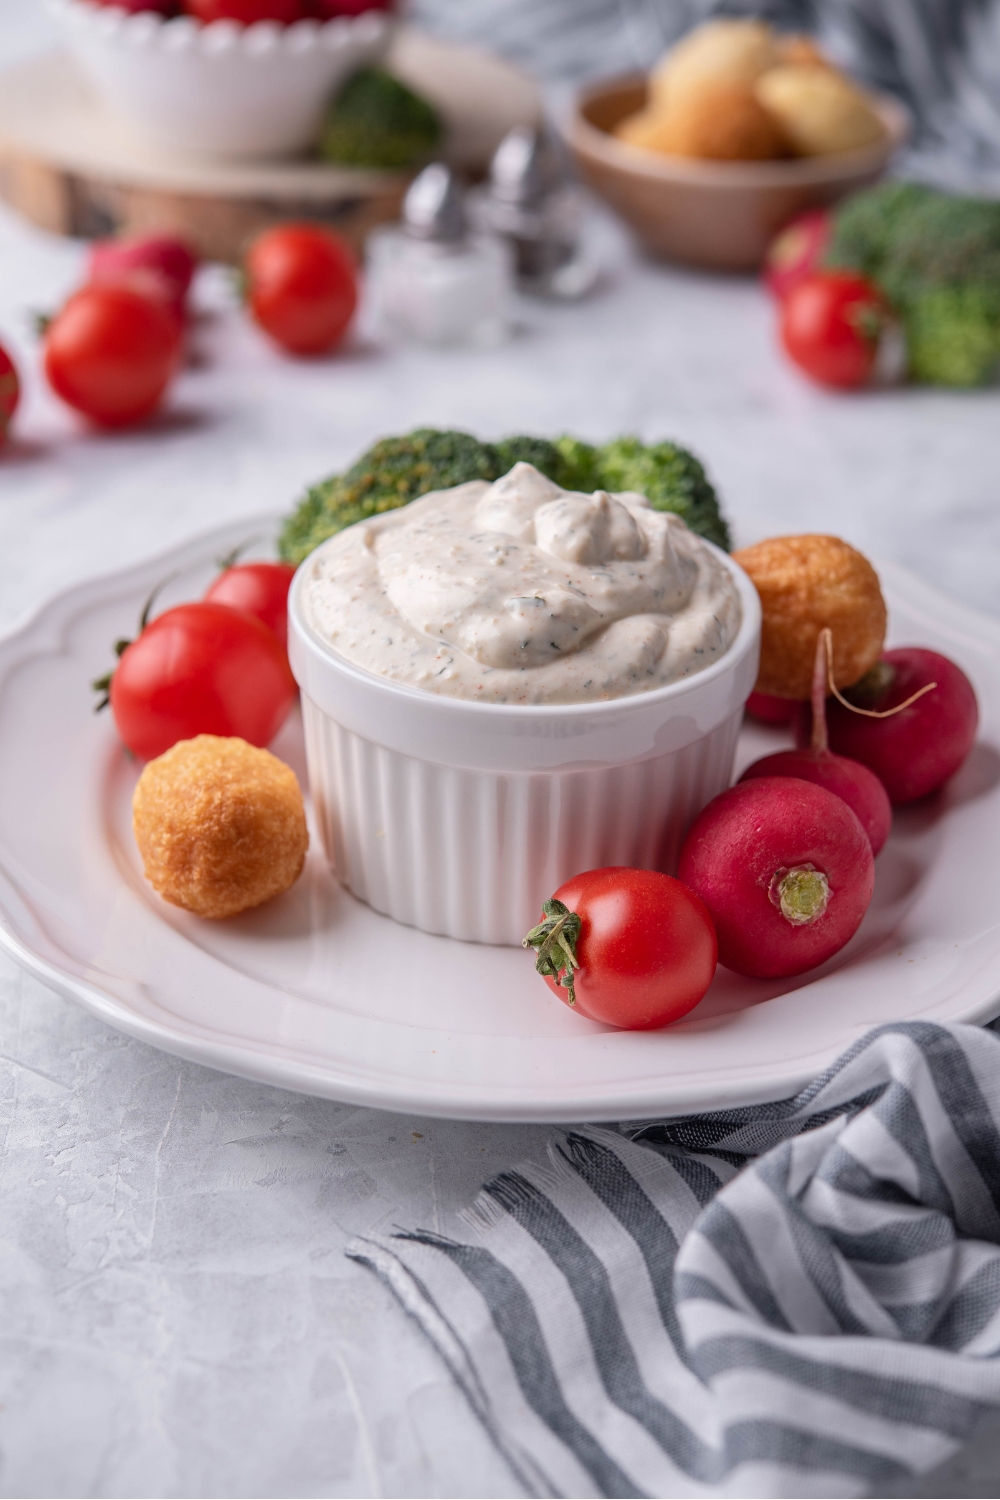 Vegetable dip in a white ramekin atop a white plate that is filled with cherry tomatoes, broccoli, and nuggets. In the background are bowls of tomatoes, nuggets, and broccoli.